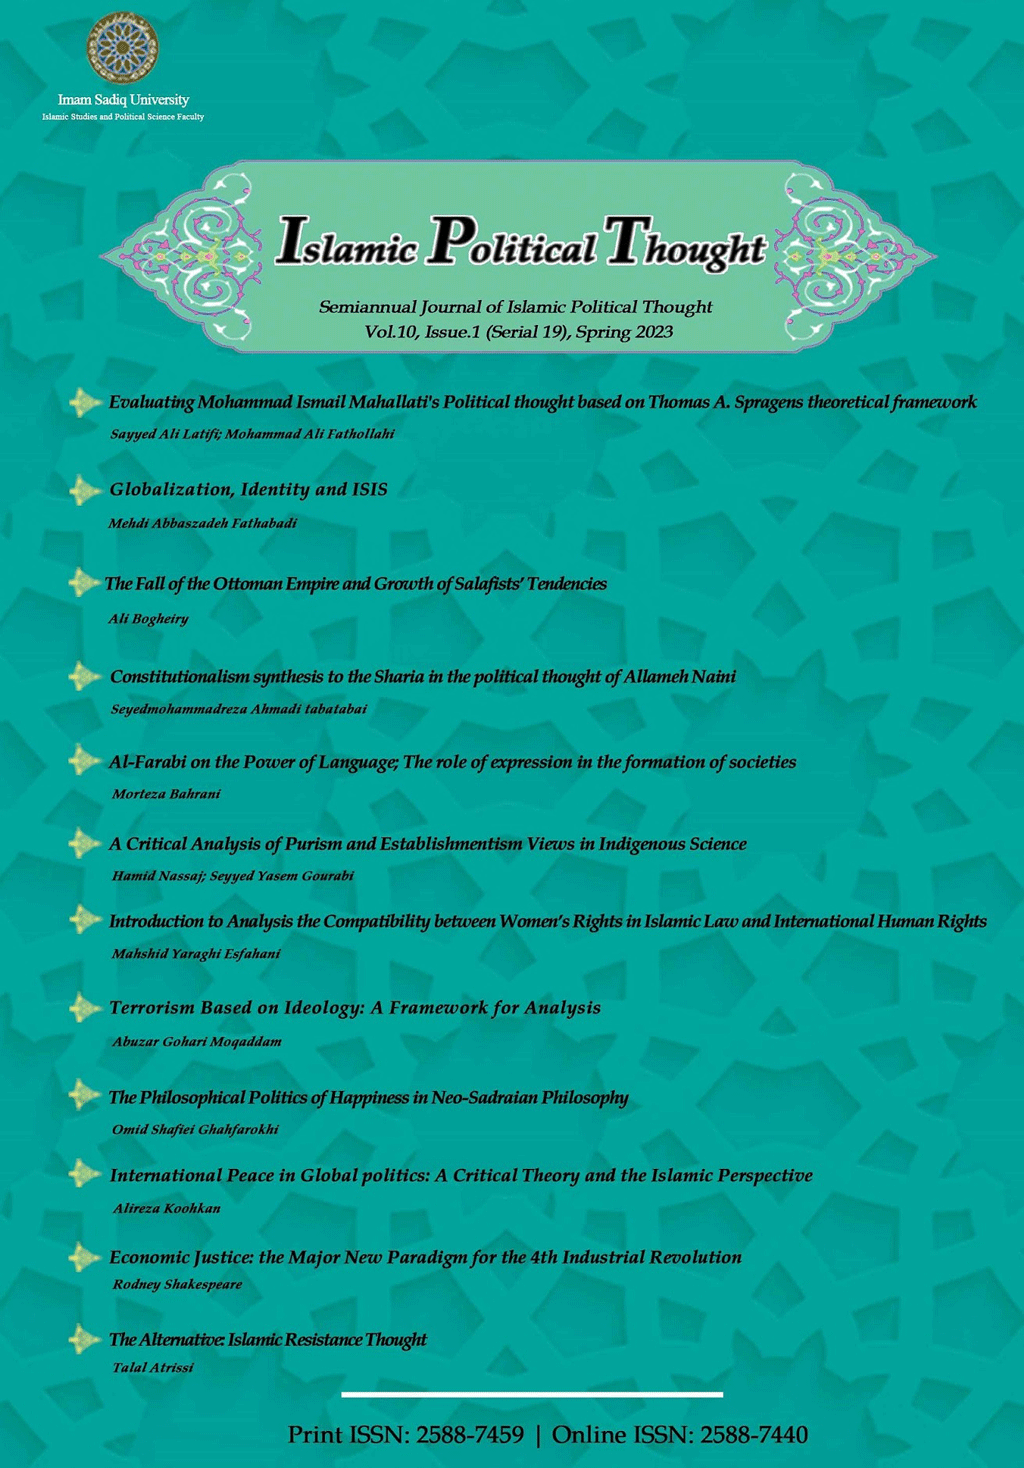 Islamic Political Thoughts - Spring 2017, Volume 4 - Number 1